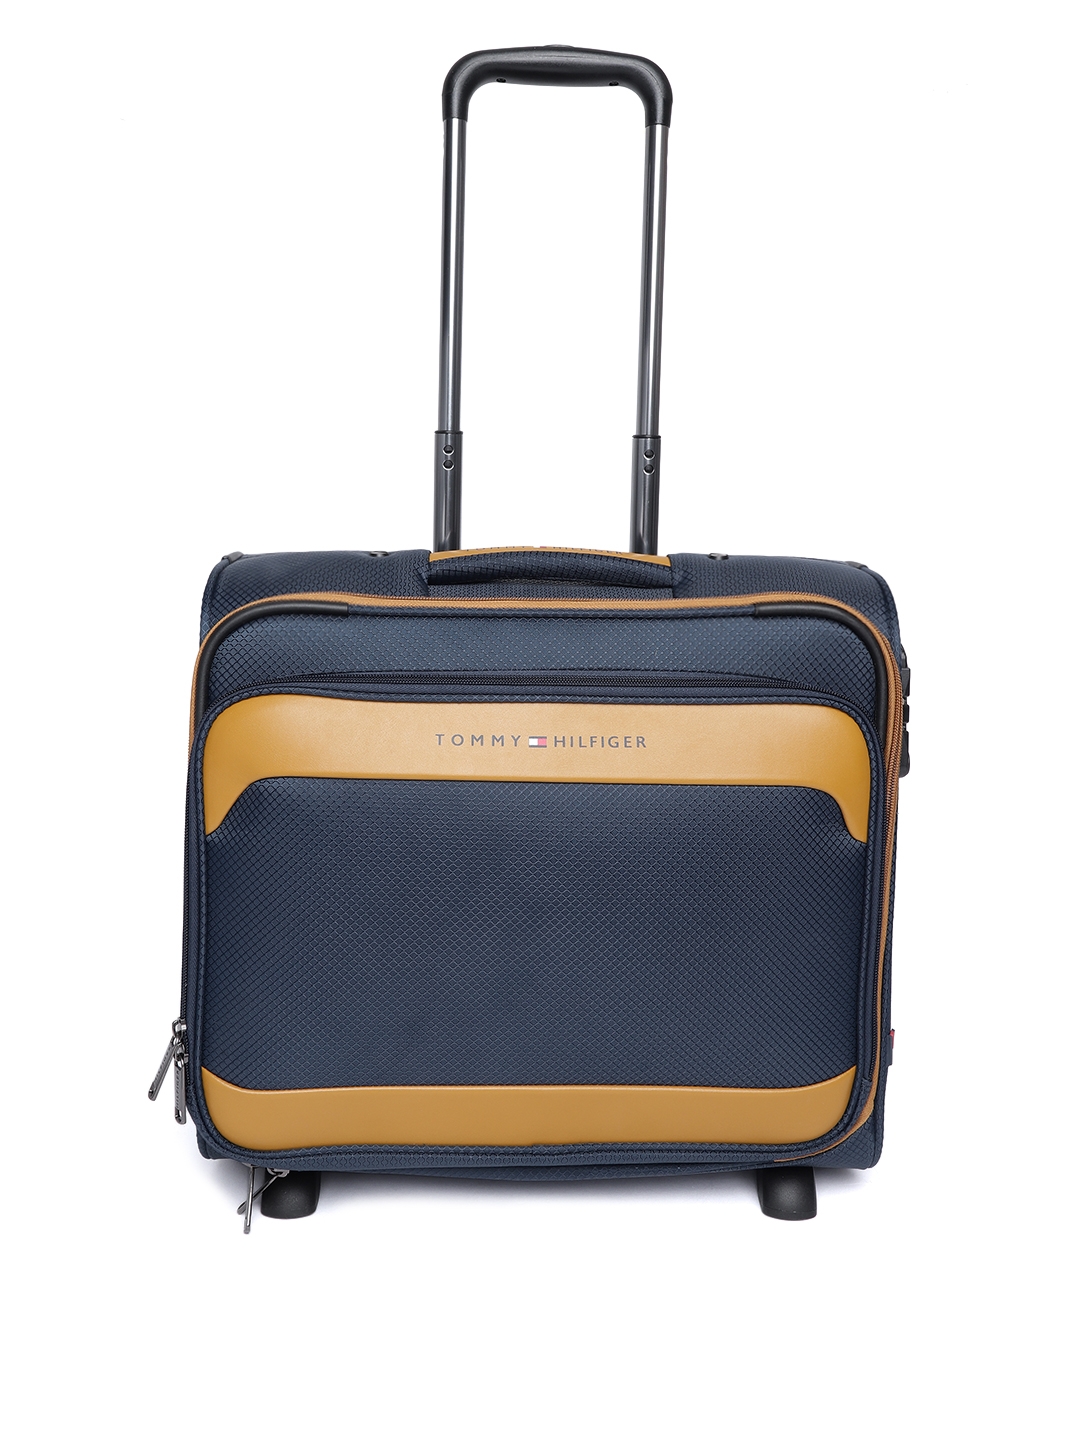 Buy Red Luggage  Trolley Bags for Men by TOMMY HILFIGER Online  Ajiocom